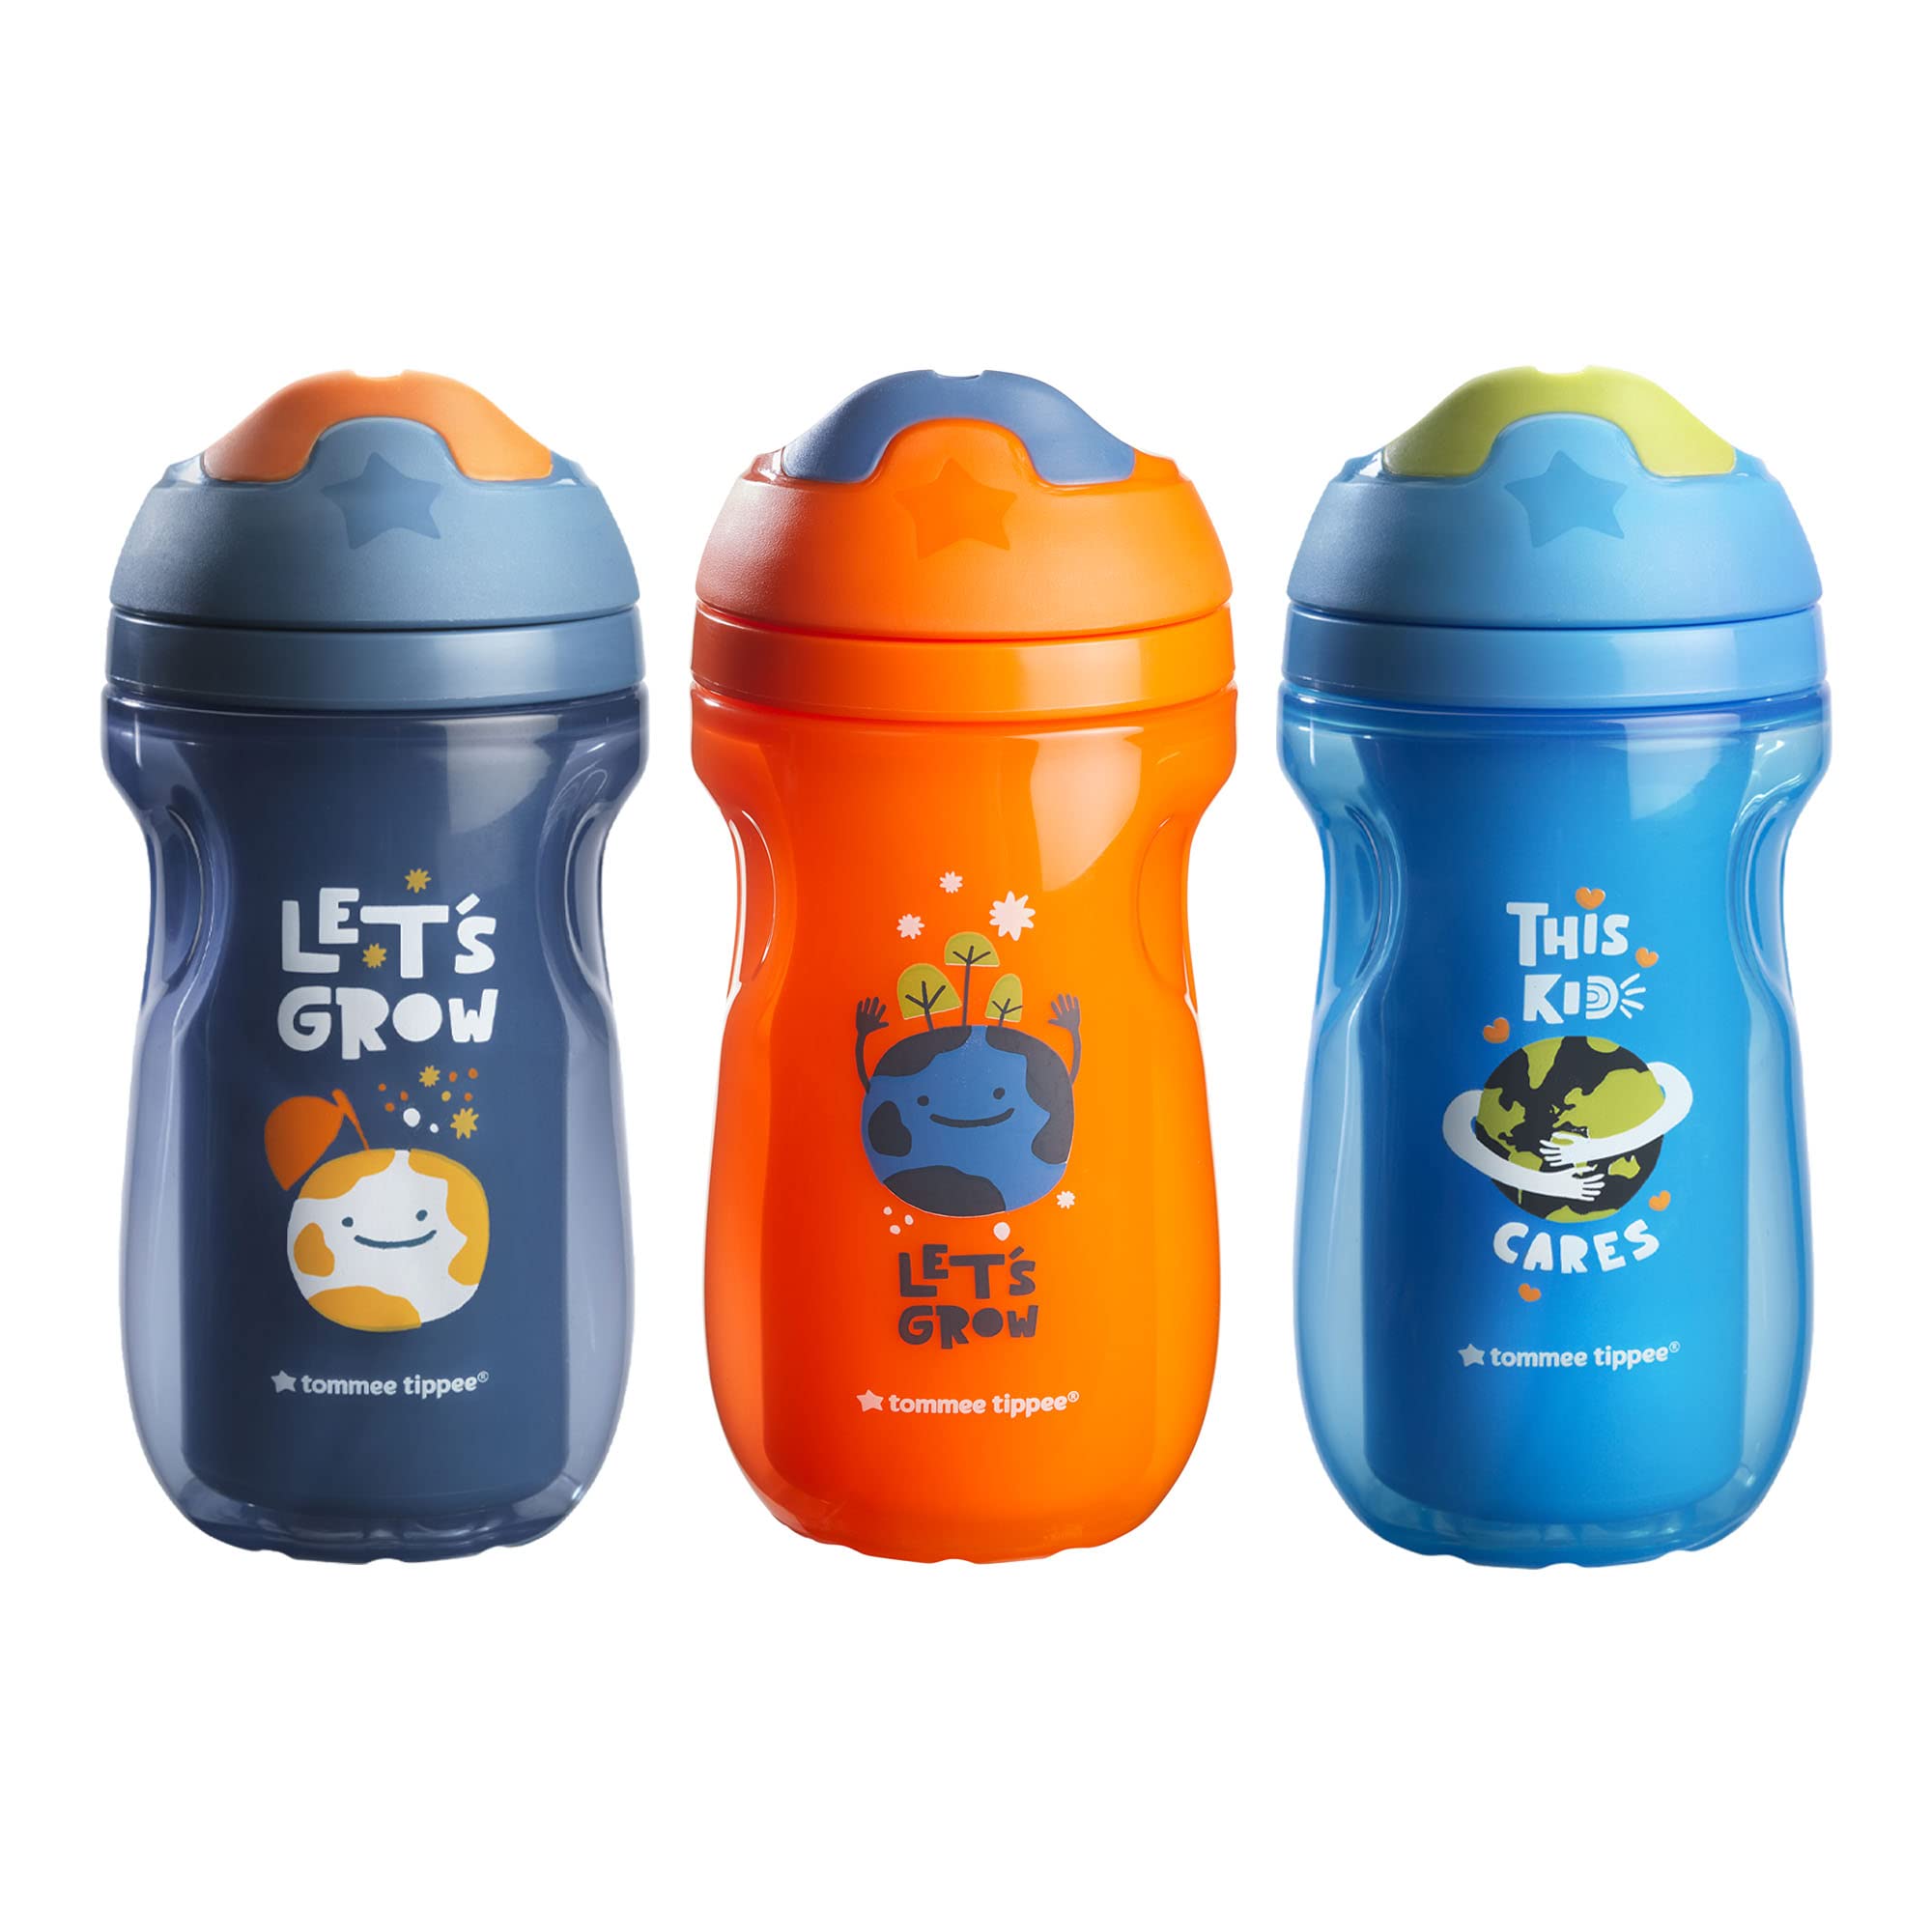 How to open a Tommee Tippee sippy cup without breaking your nails